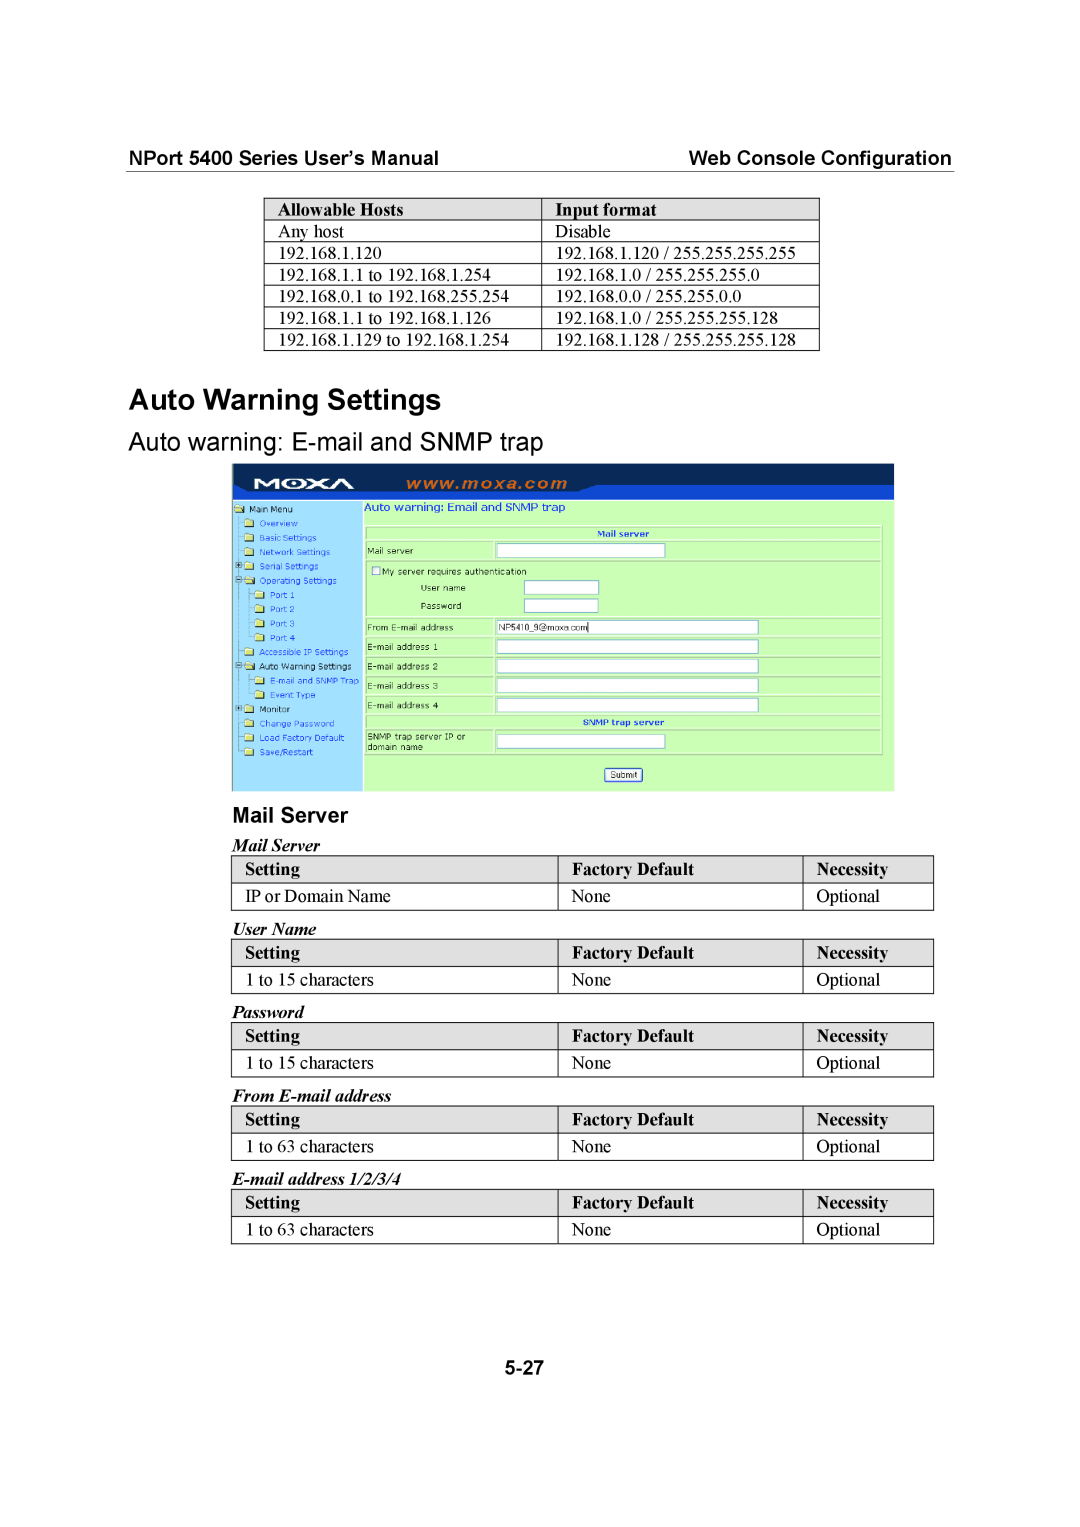 Moxa Technologies 5400 Series user manual Auto Warning Settings, Auto warning E-mail and SNMP trap, Mail Server 